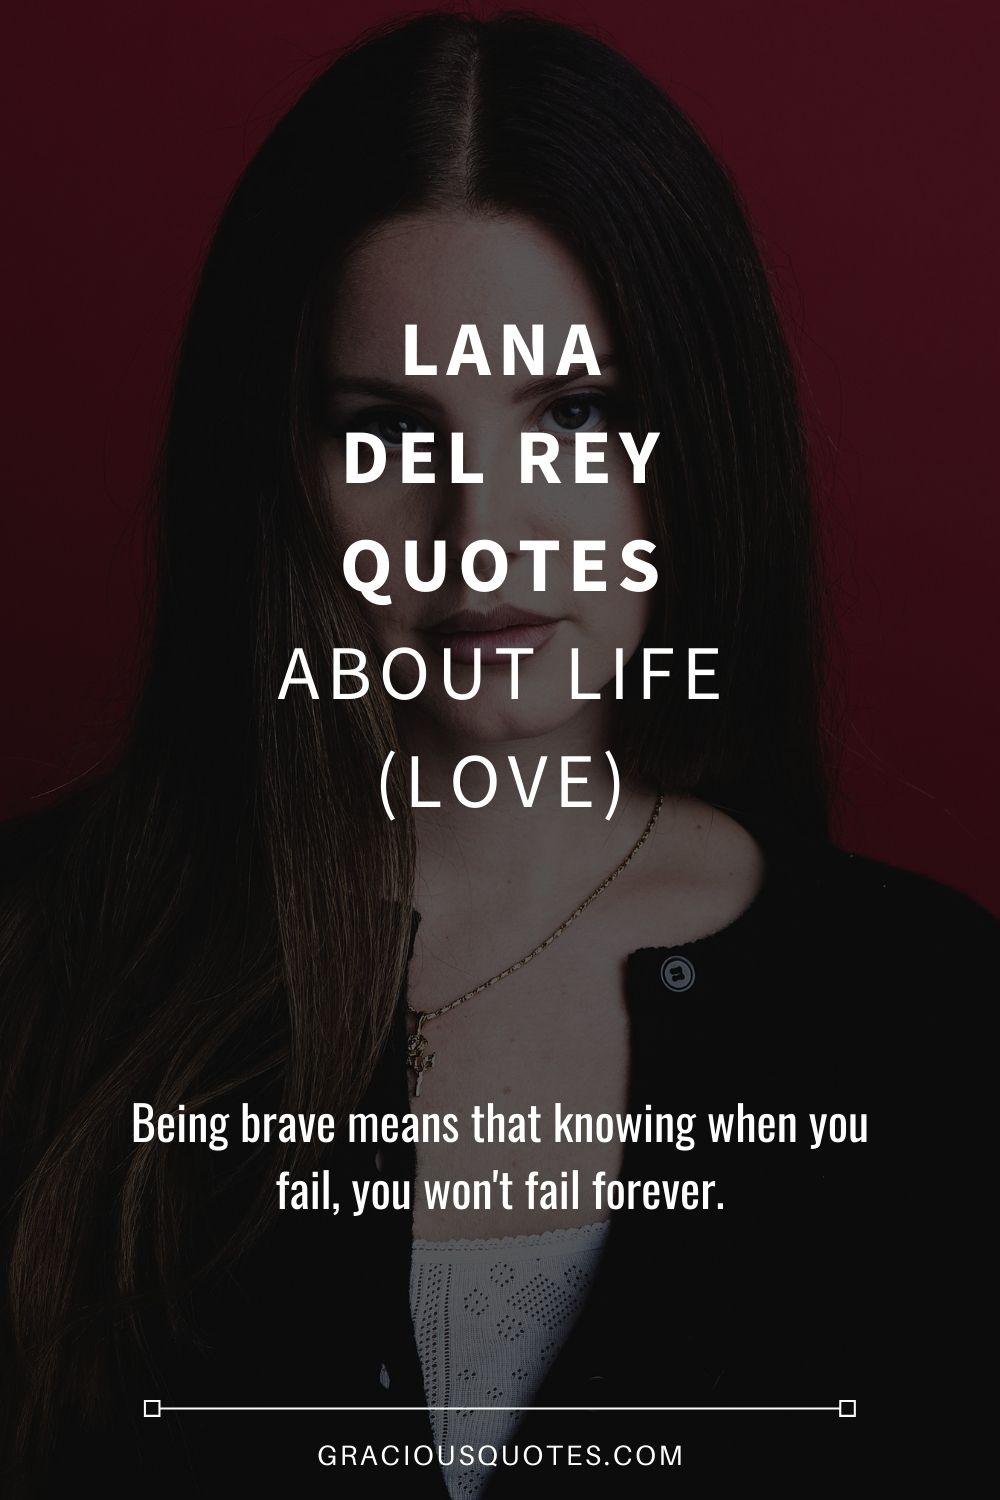 Lana Del Rey Quotes About Life (LOVE) - Gracious Quotes